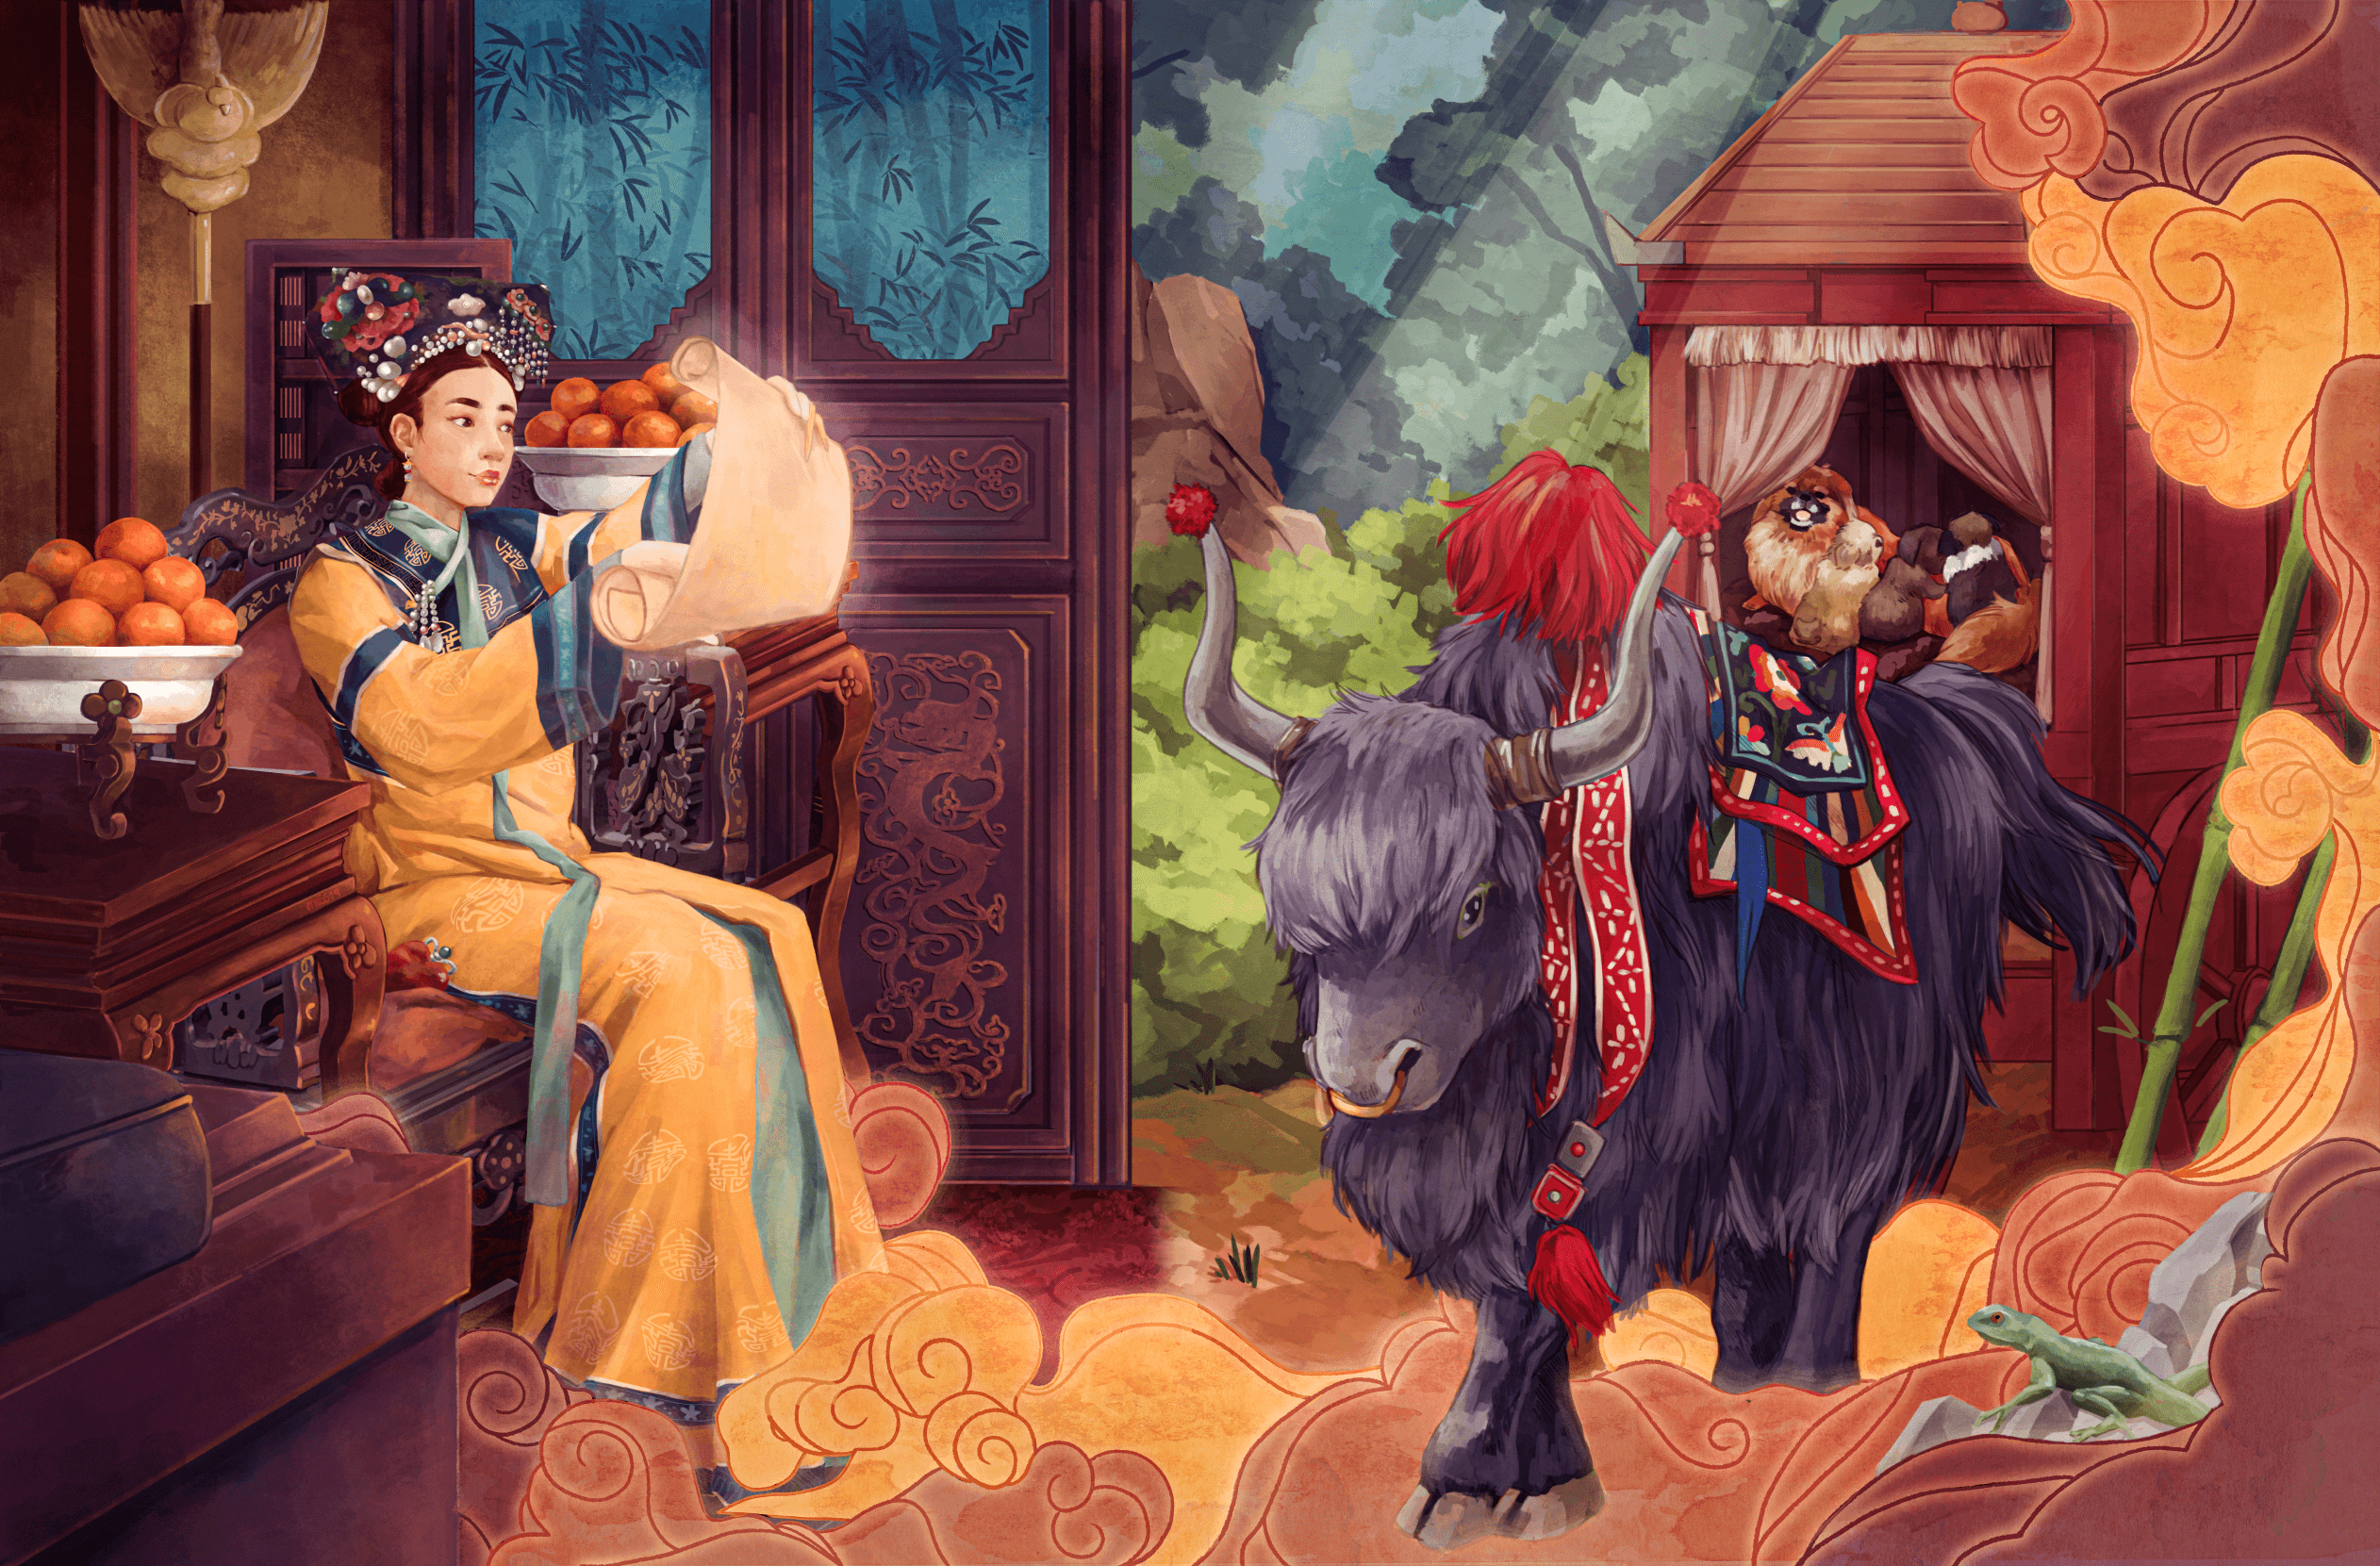 Empress Cixi proclaims the Hair of Foo Foo is that of a Tibetan Yak